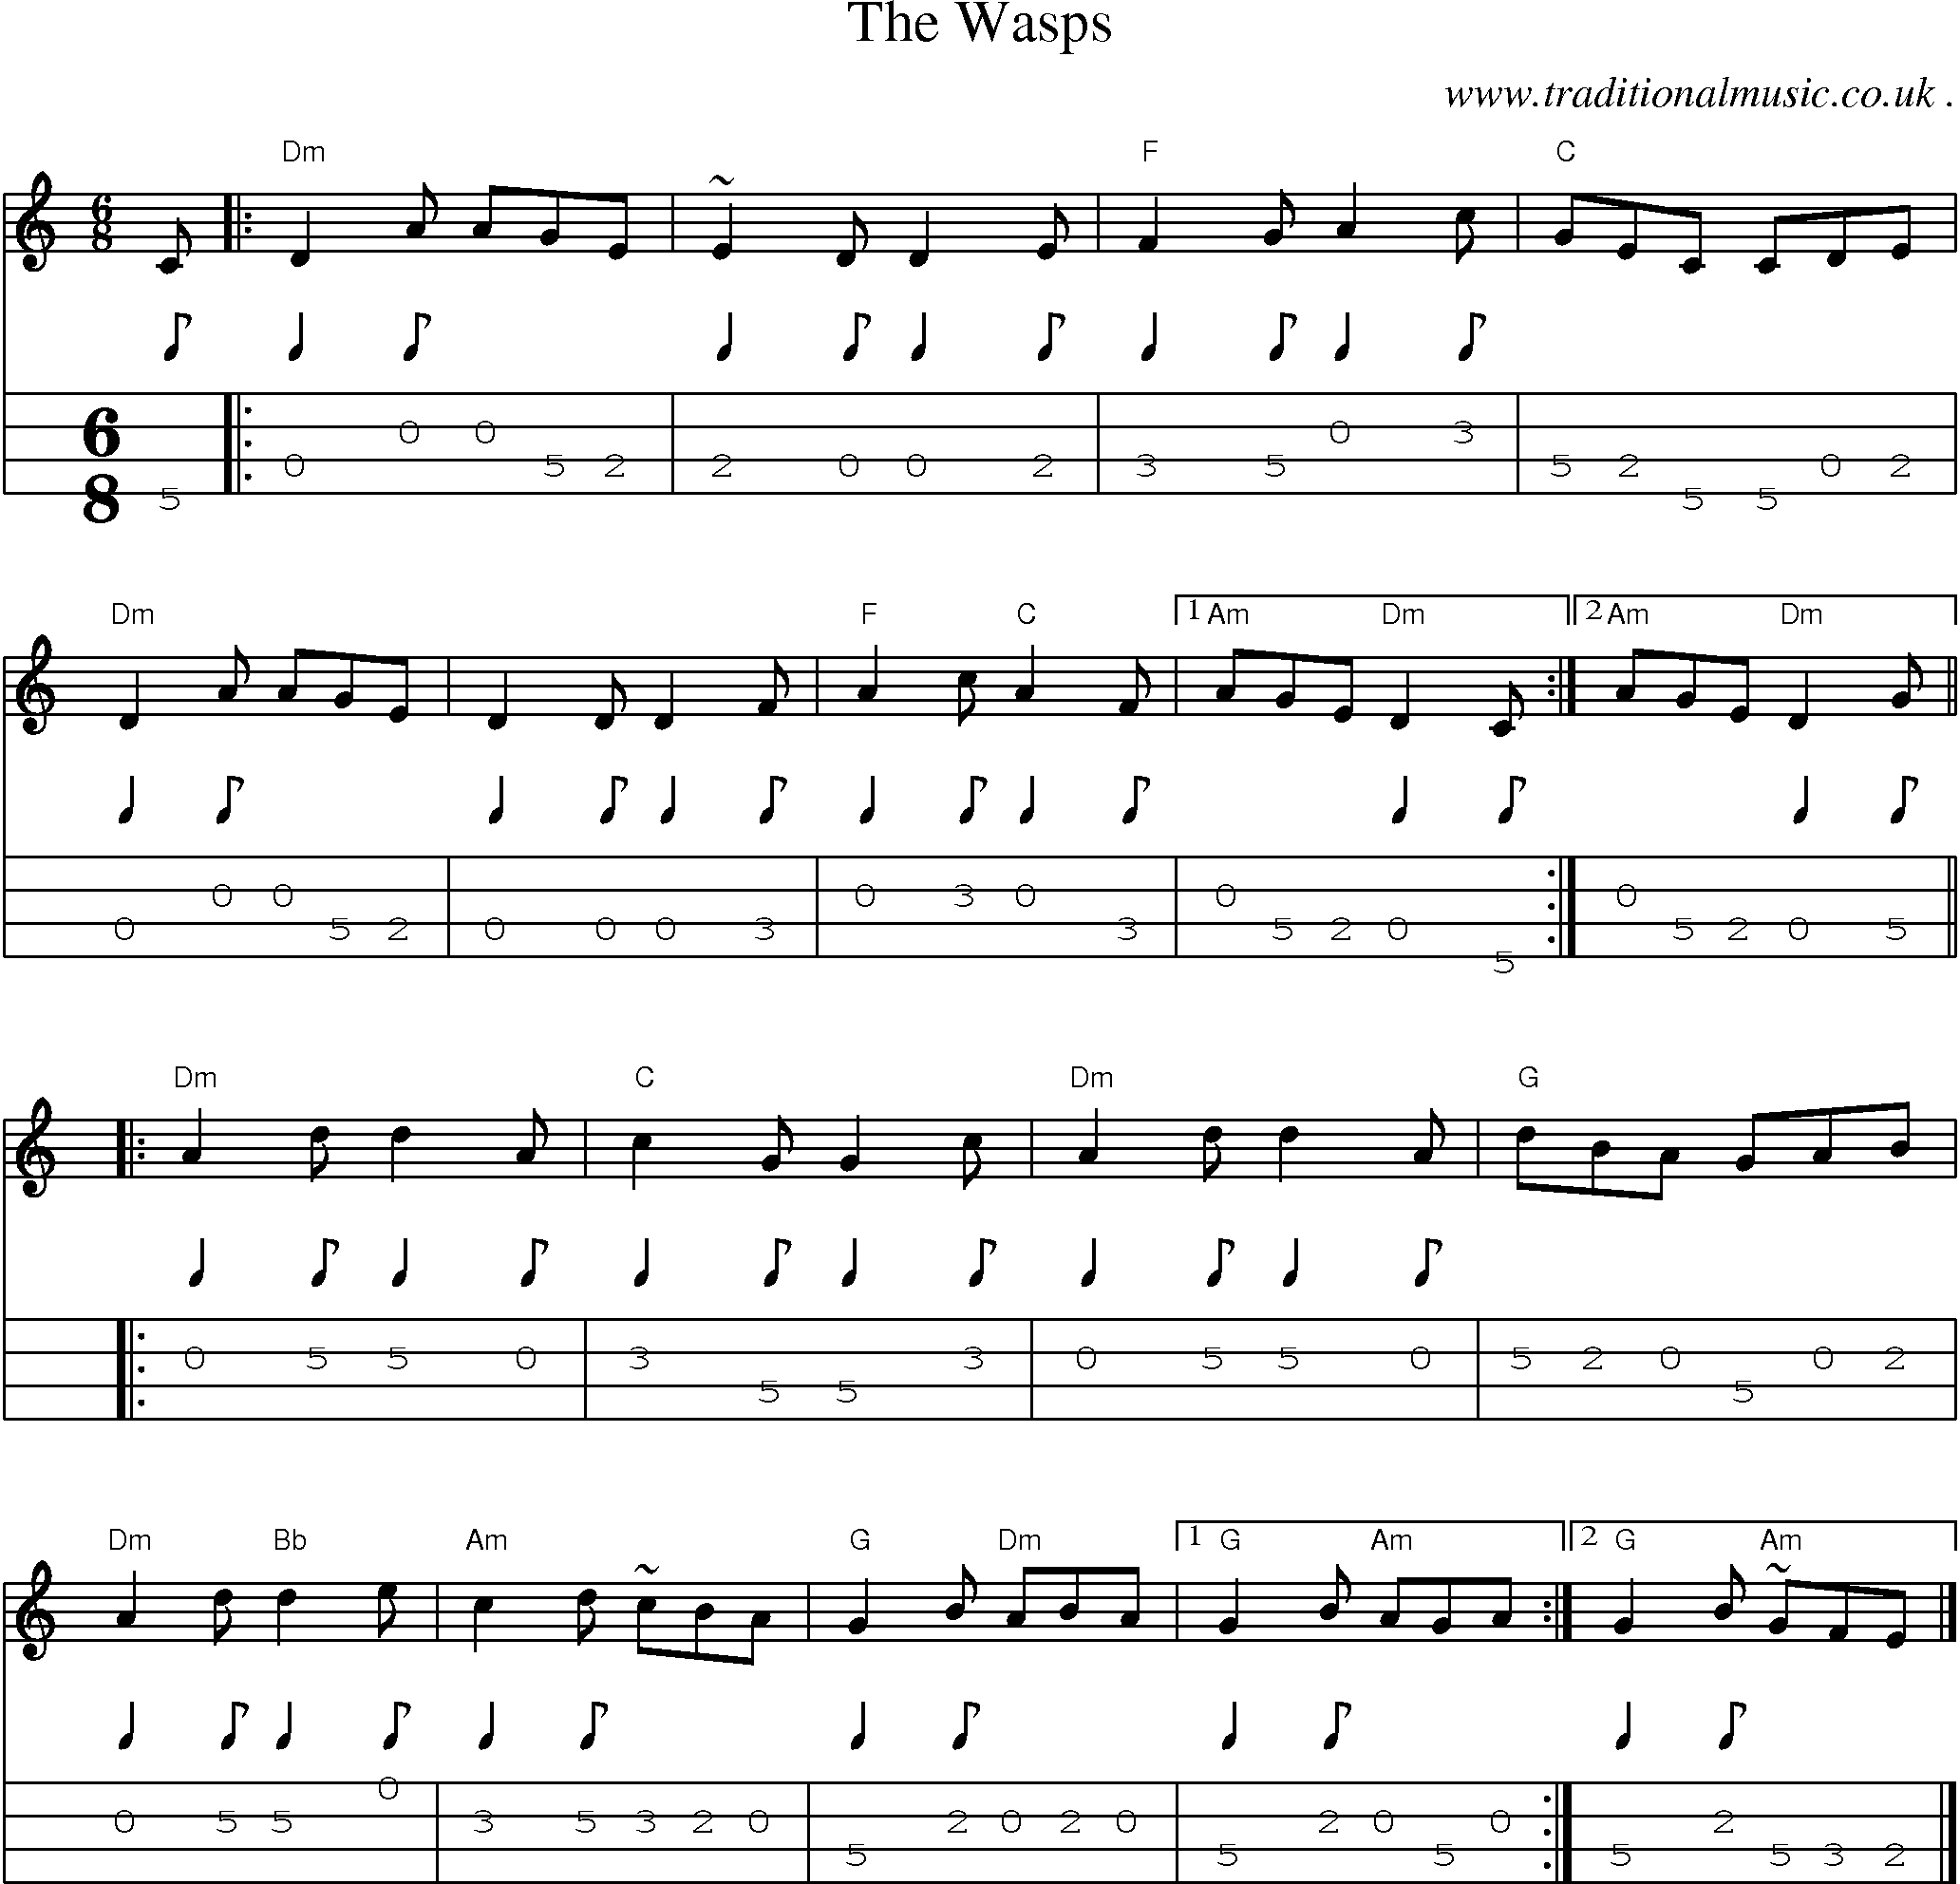 Music Score and Guitar Tabs for The Wasps